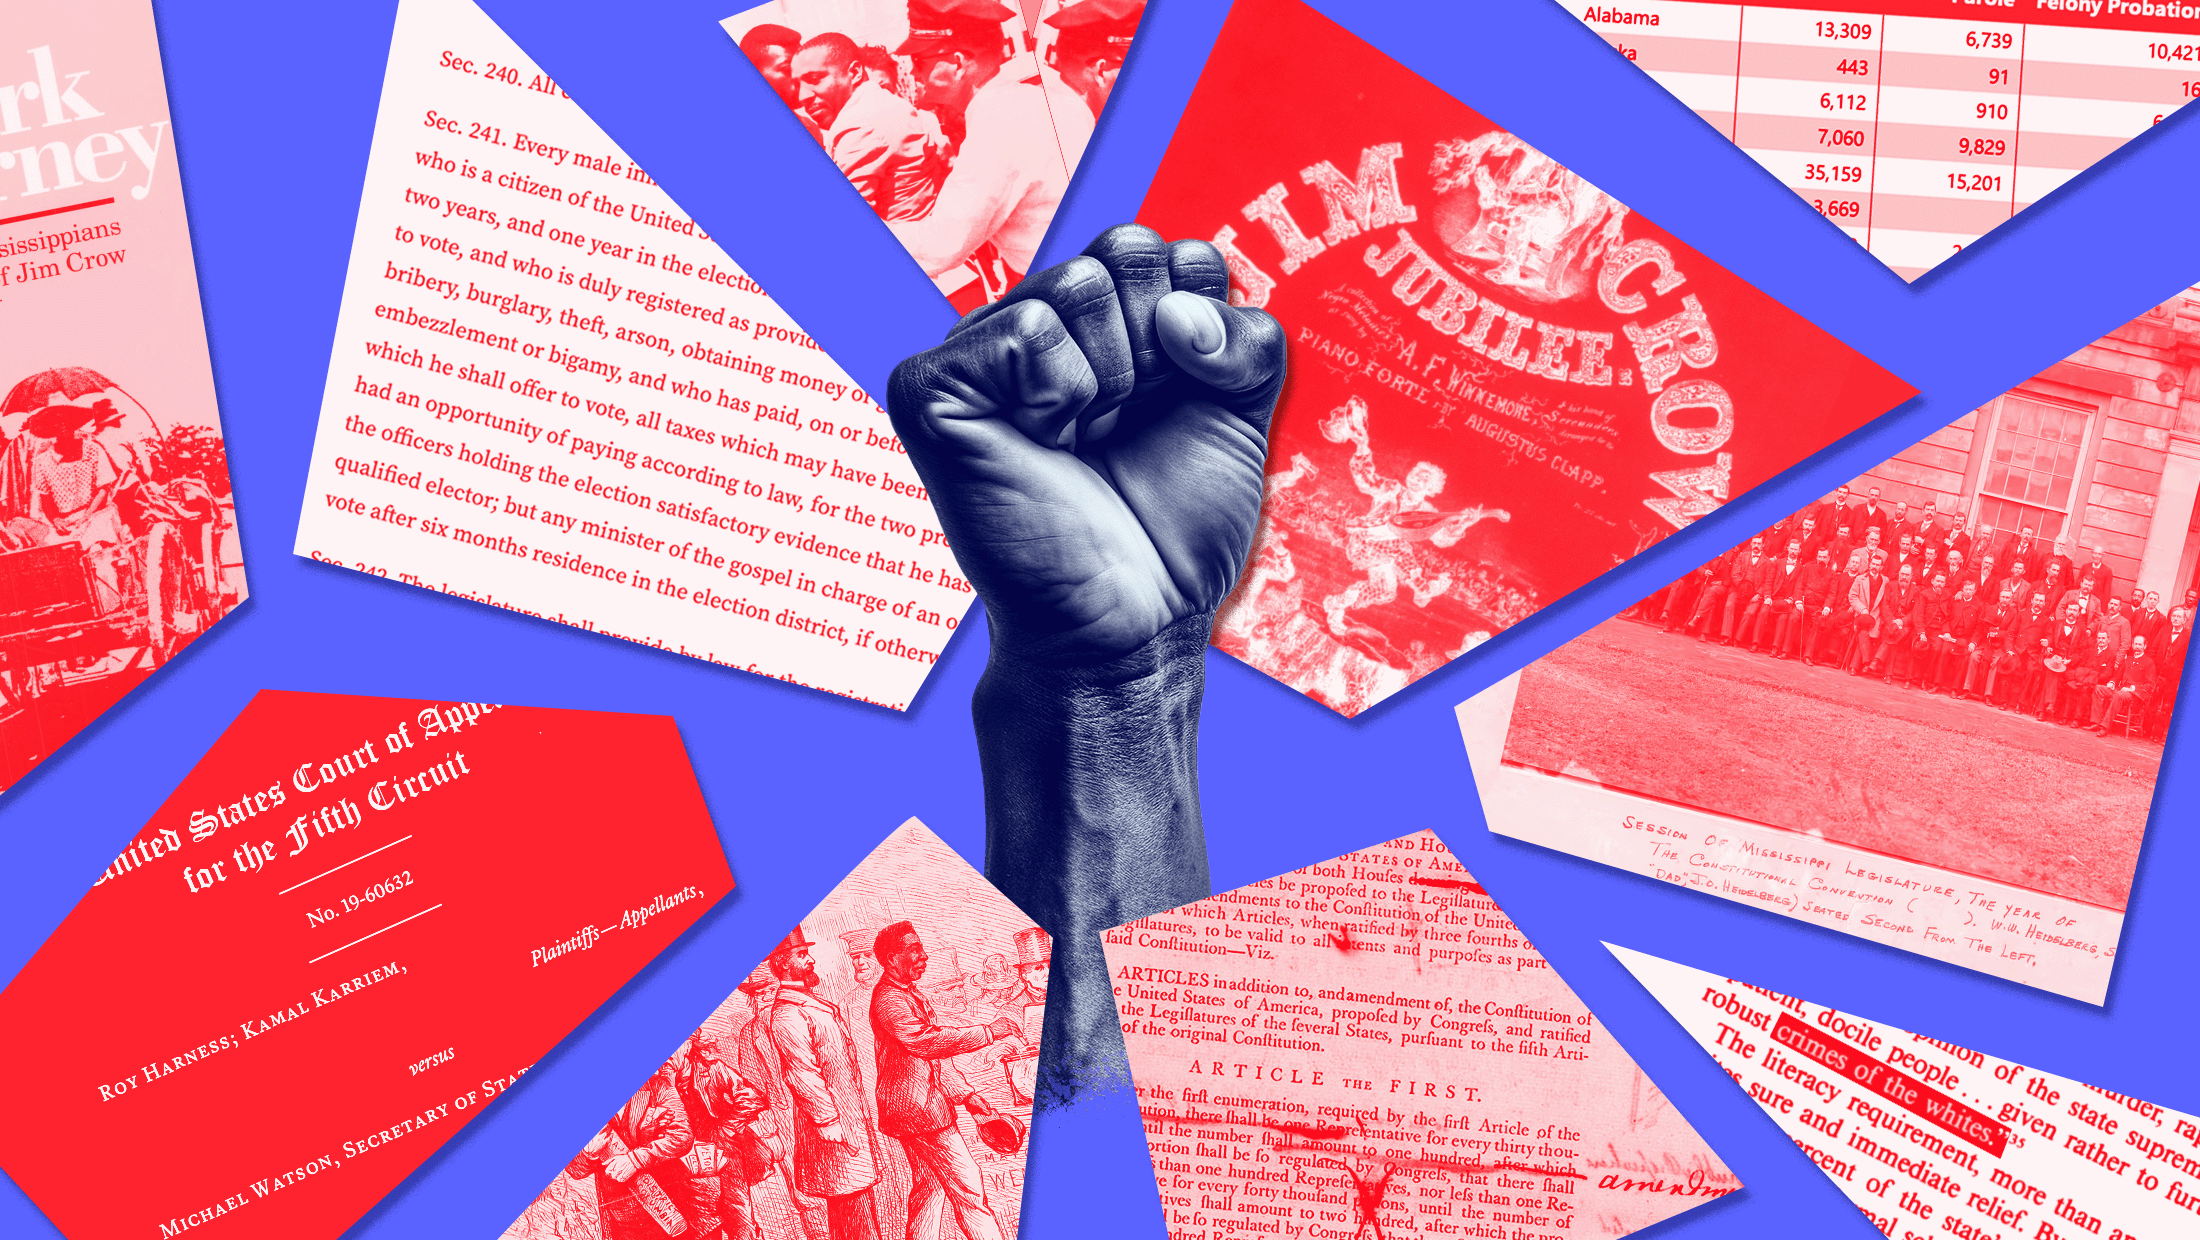 Blue background with shattered pieces in red that detail Mississippi's Jim Crow-era felony disenfranchisement law, Section 241, and the 5th Circuit's strike down of the law. There is a blue-toned fist in the middle of all the shattered pieces.